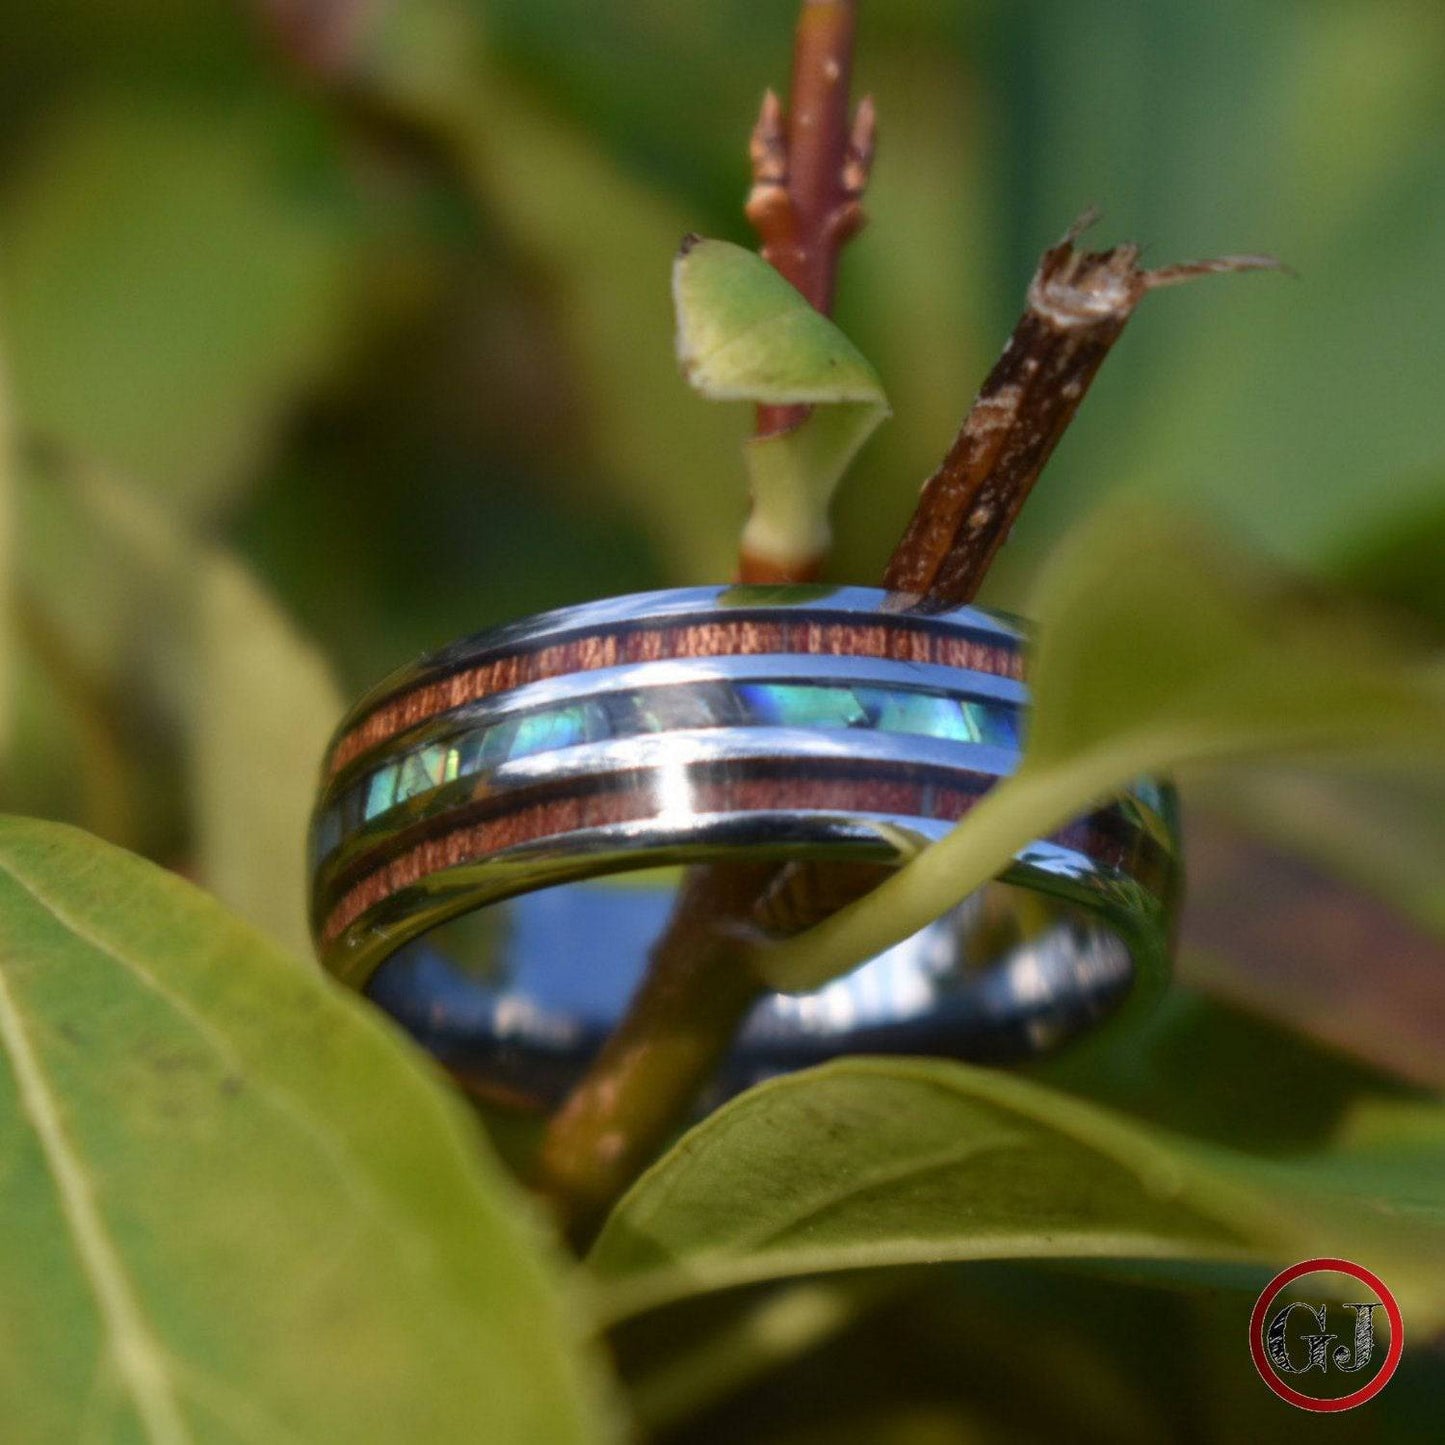 Tungsten 8mm Ring with Koa Wood and Shell Inlay - Tungsten Titans